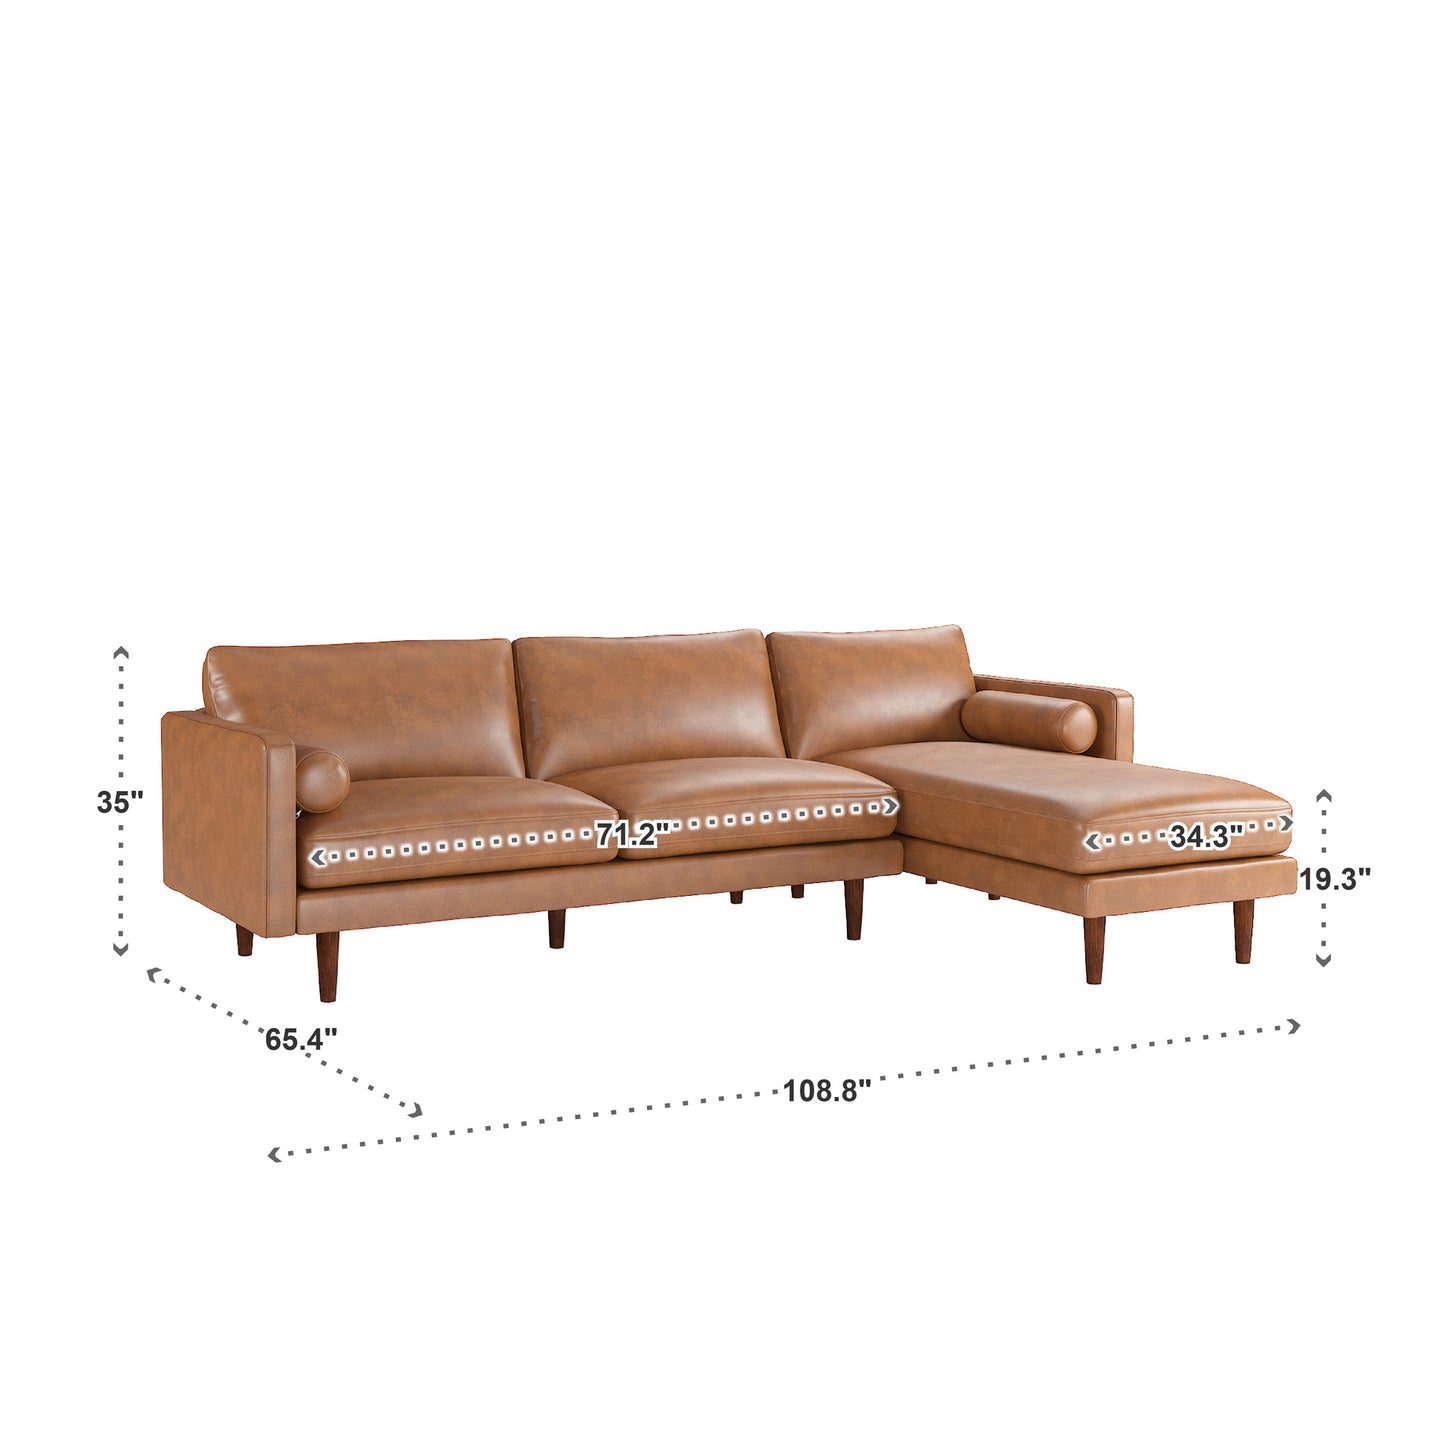 Mid-Century Faux Leather Sectional Sofa - Caramel, Right-Facing Chaise, 3-Seat Sectional